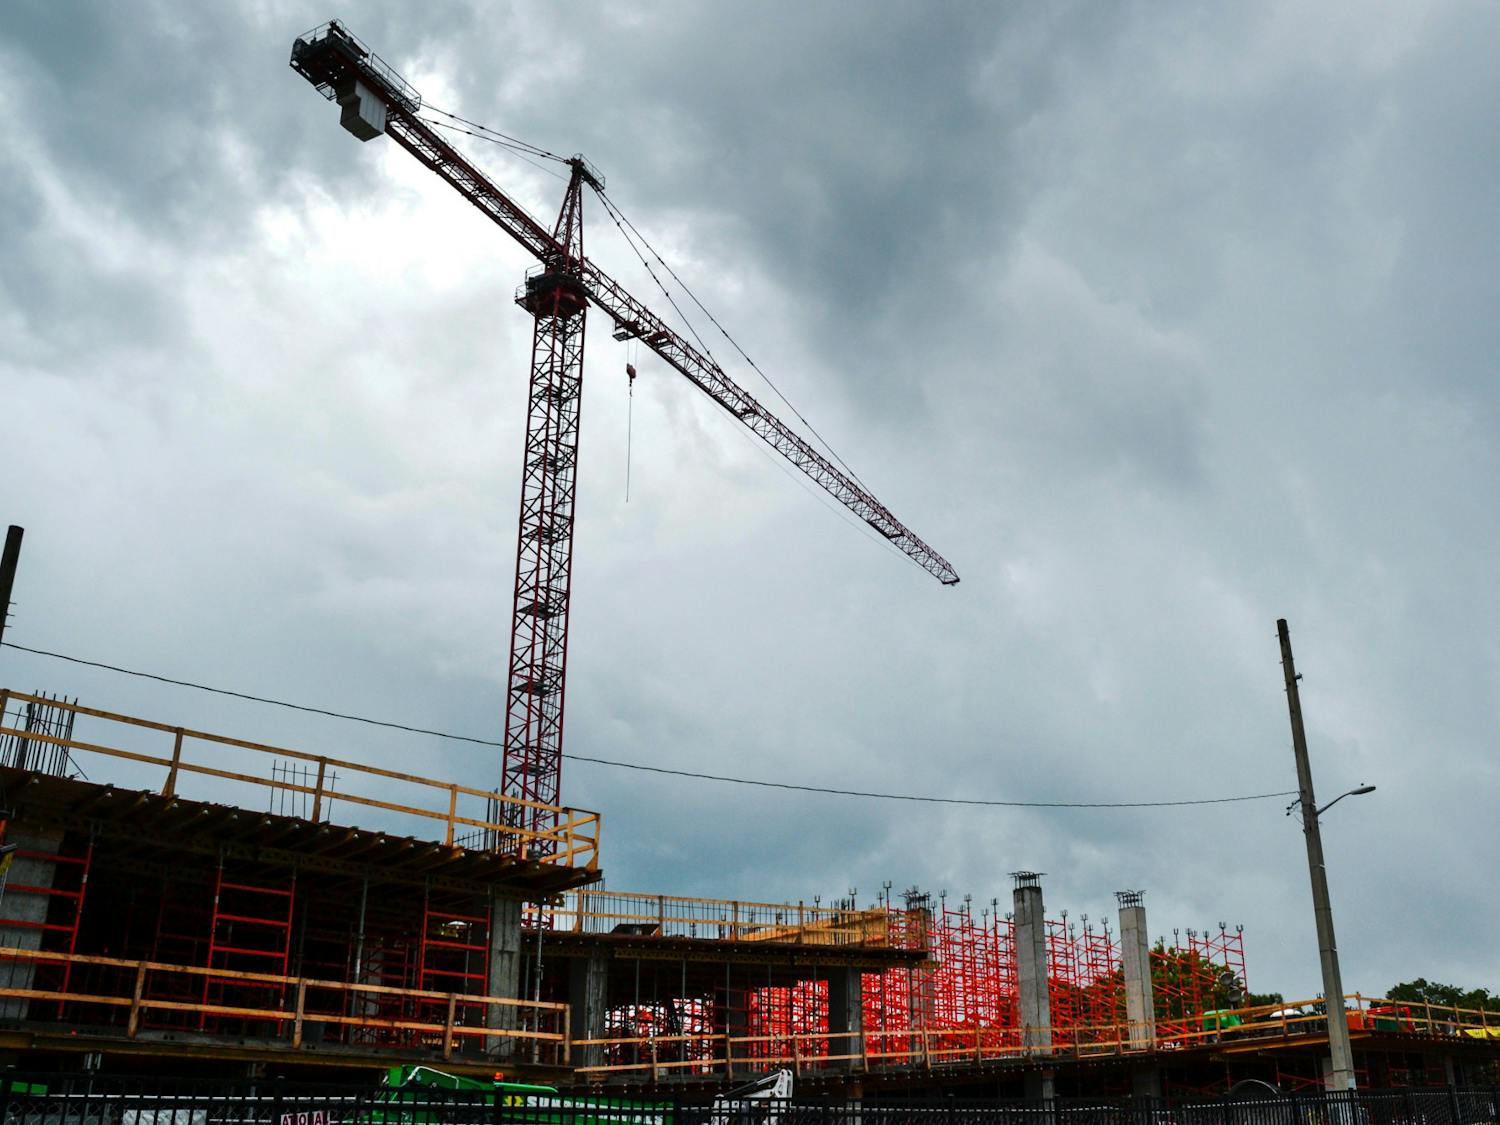 A crane towers over the Evolve apartment complex construction site at 931 West University Avenue on Tuesday, June 16, 2021. Evolve is one of several new mid-rise apartment complexes under construction in midtown and downtown Gainesville.